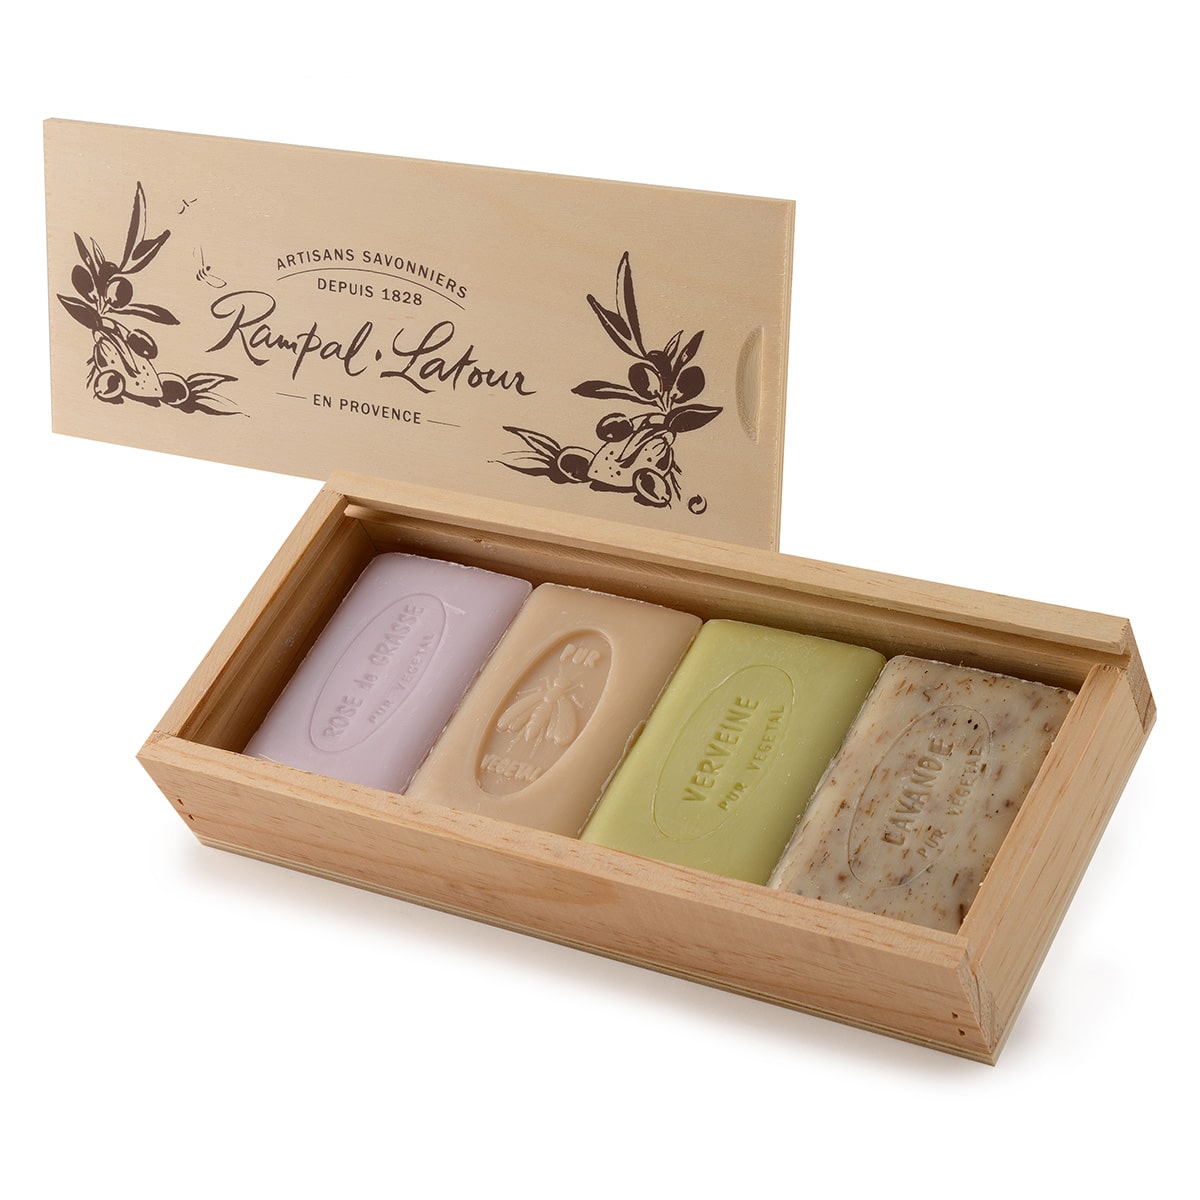 Pencil box of 4 scented soaps